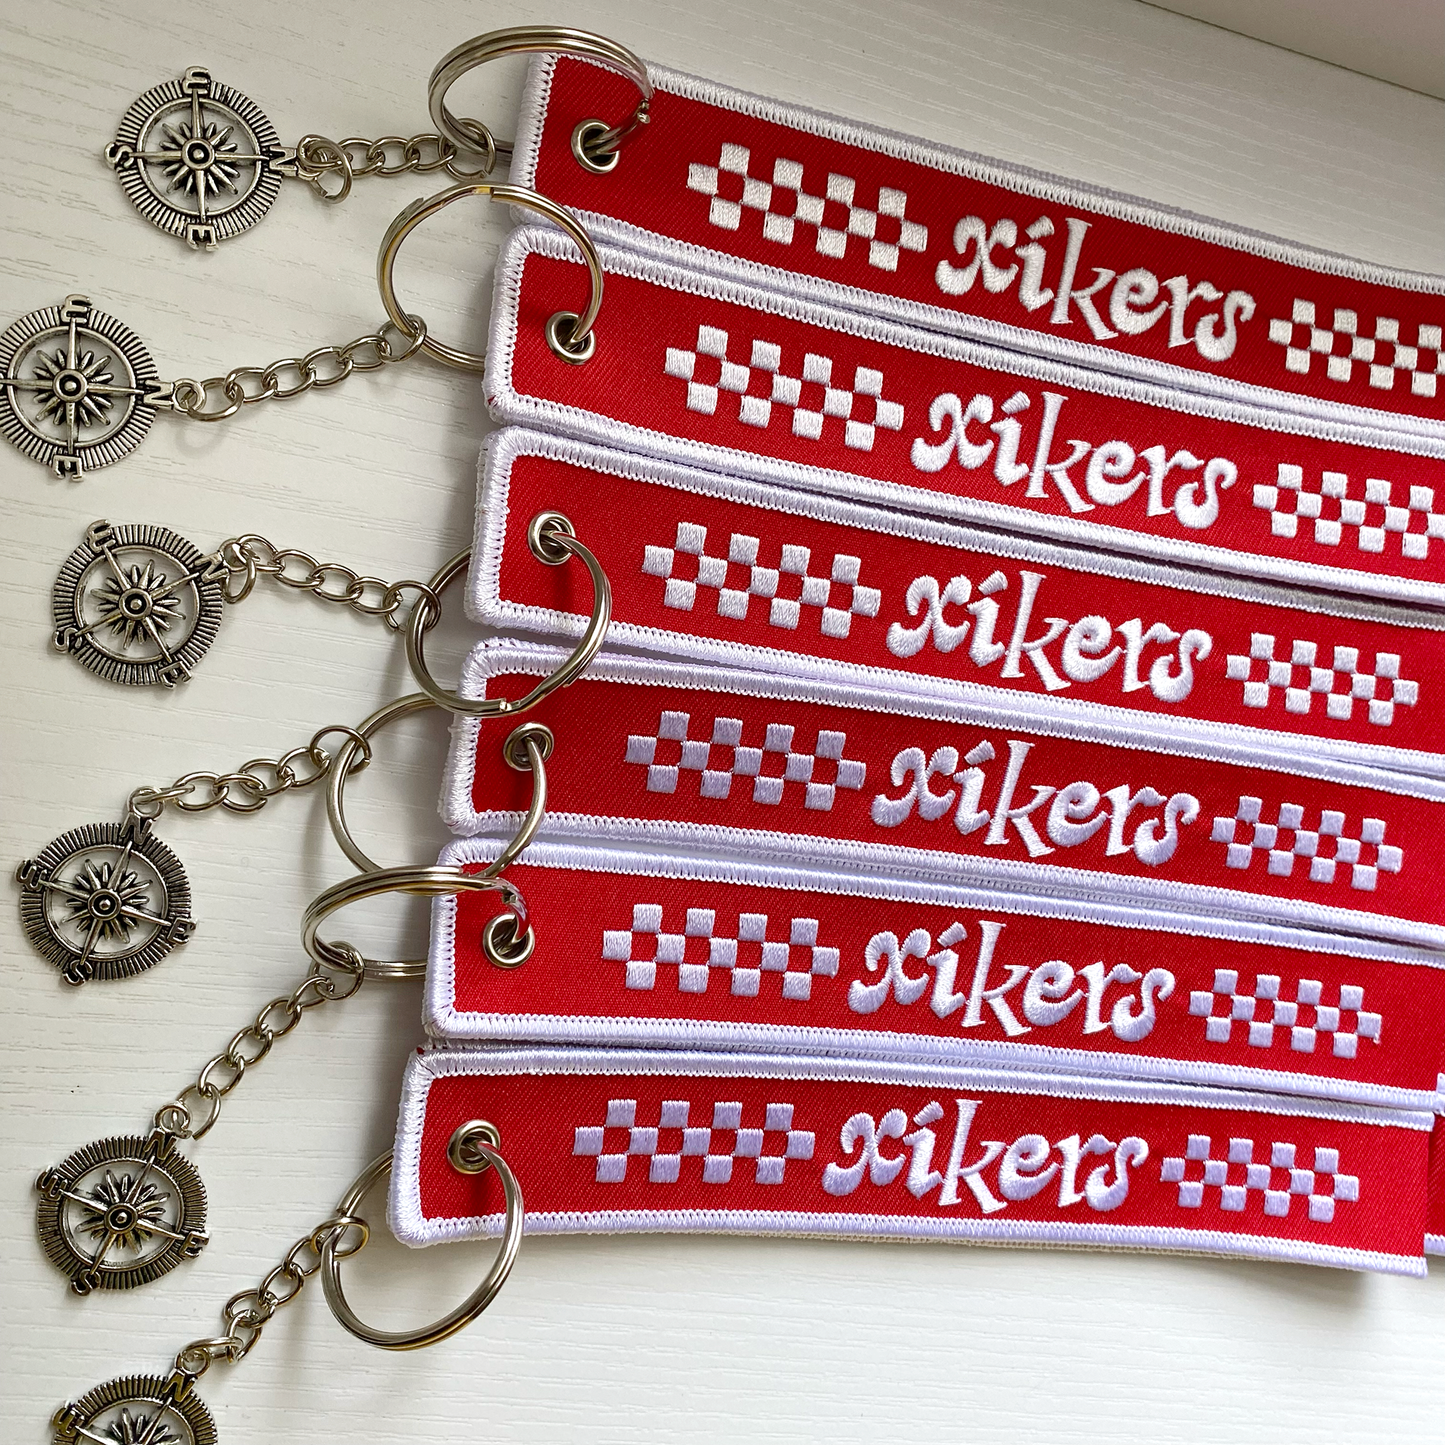 XIKERS Inspired Embroidered Keychain Wristlet